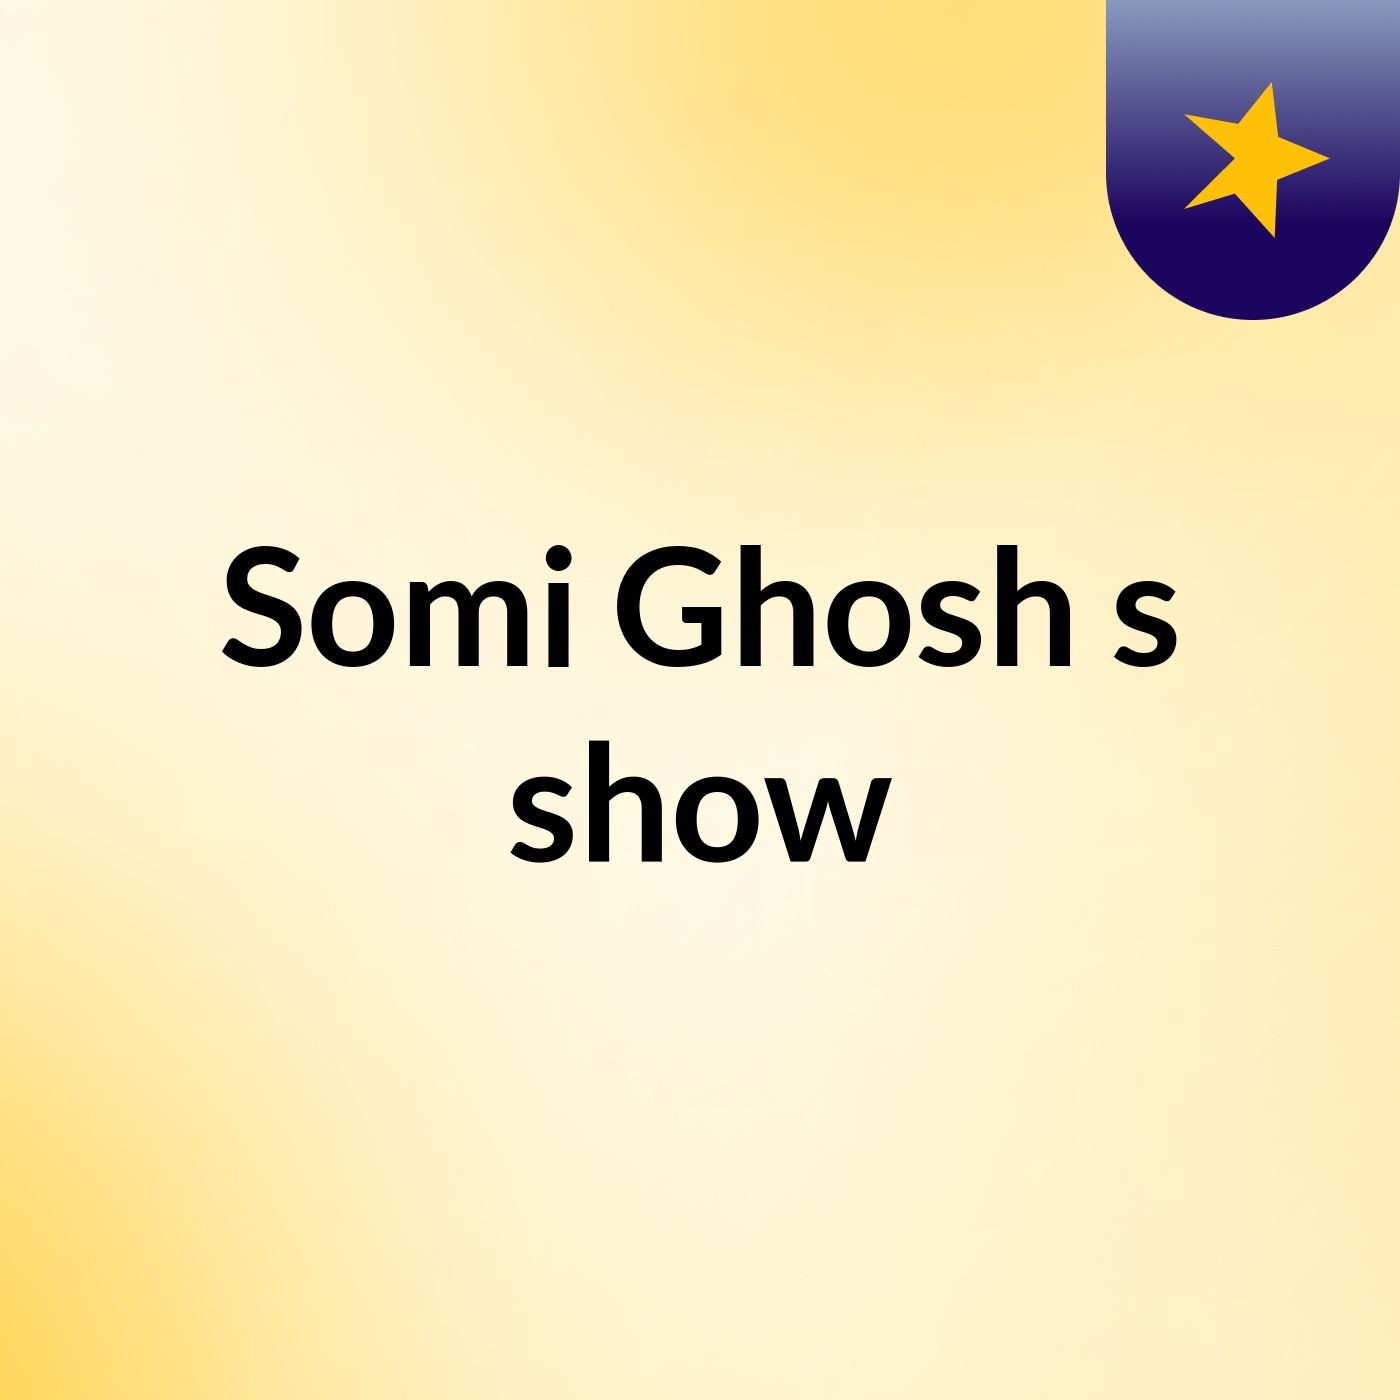 Somi Ghosh's show